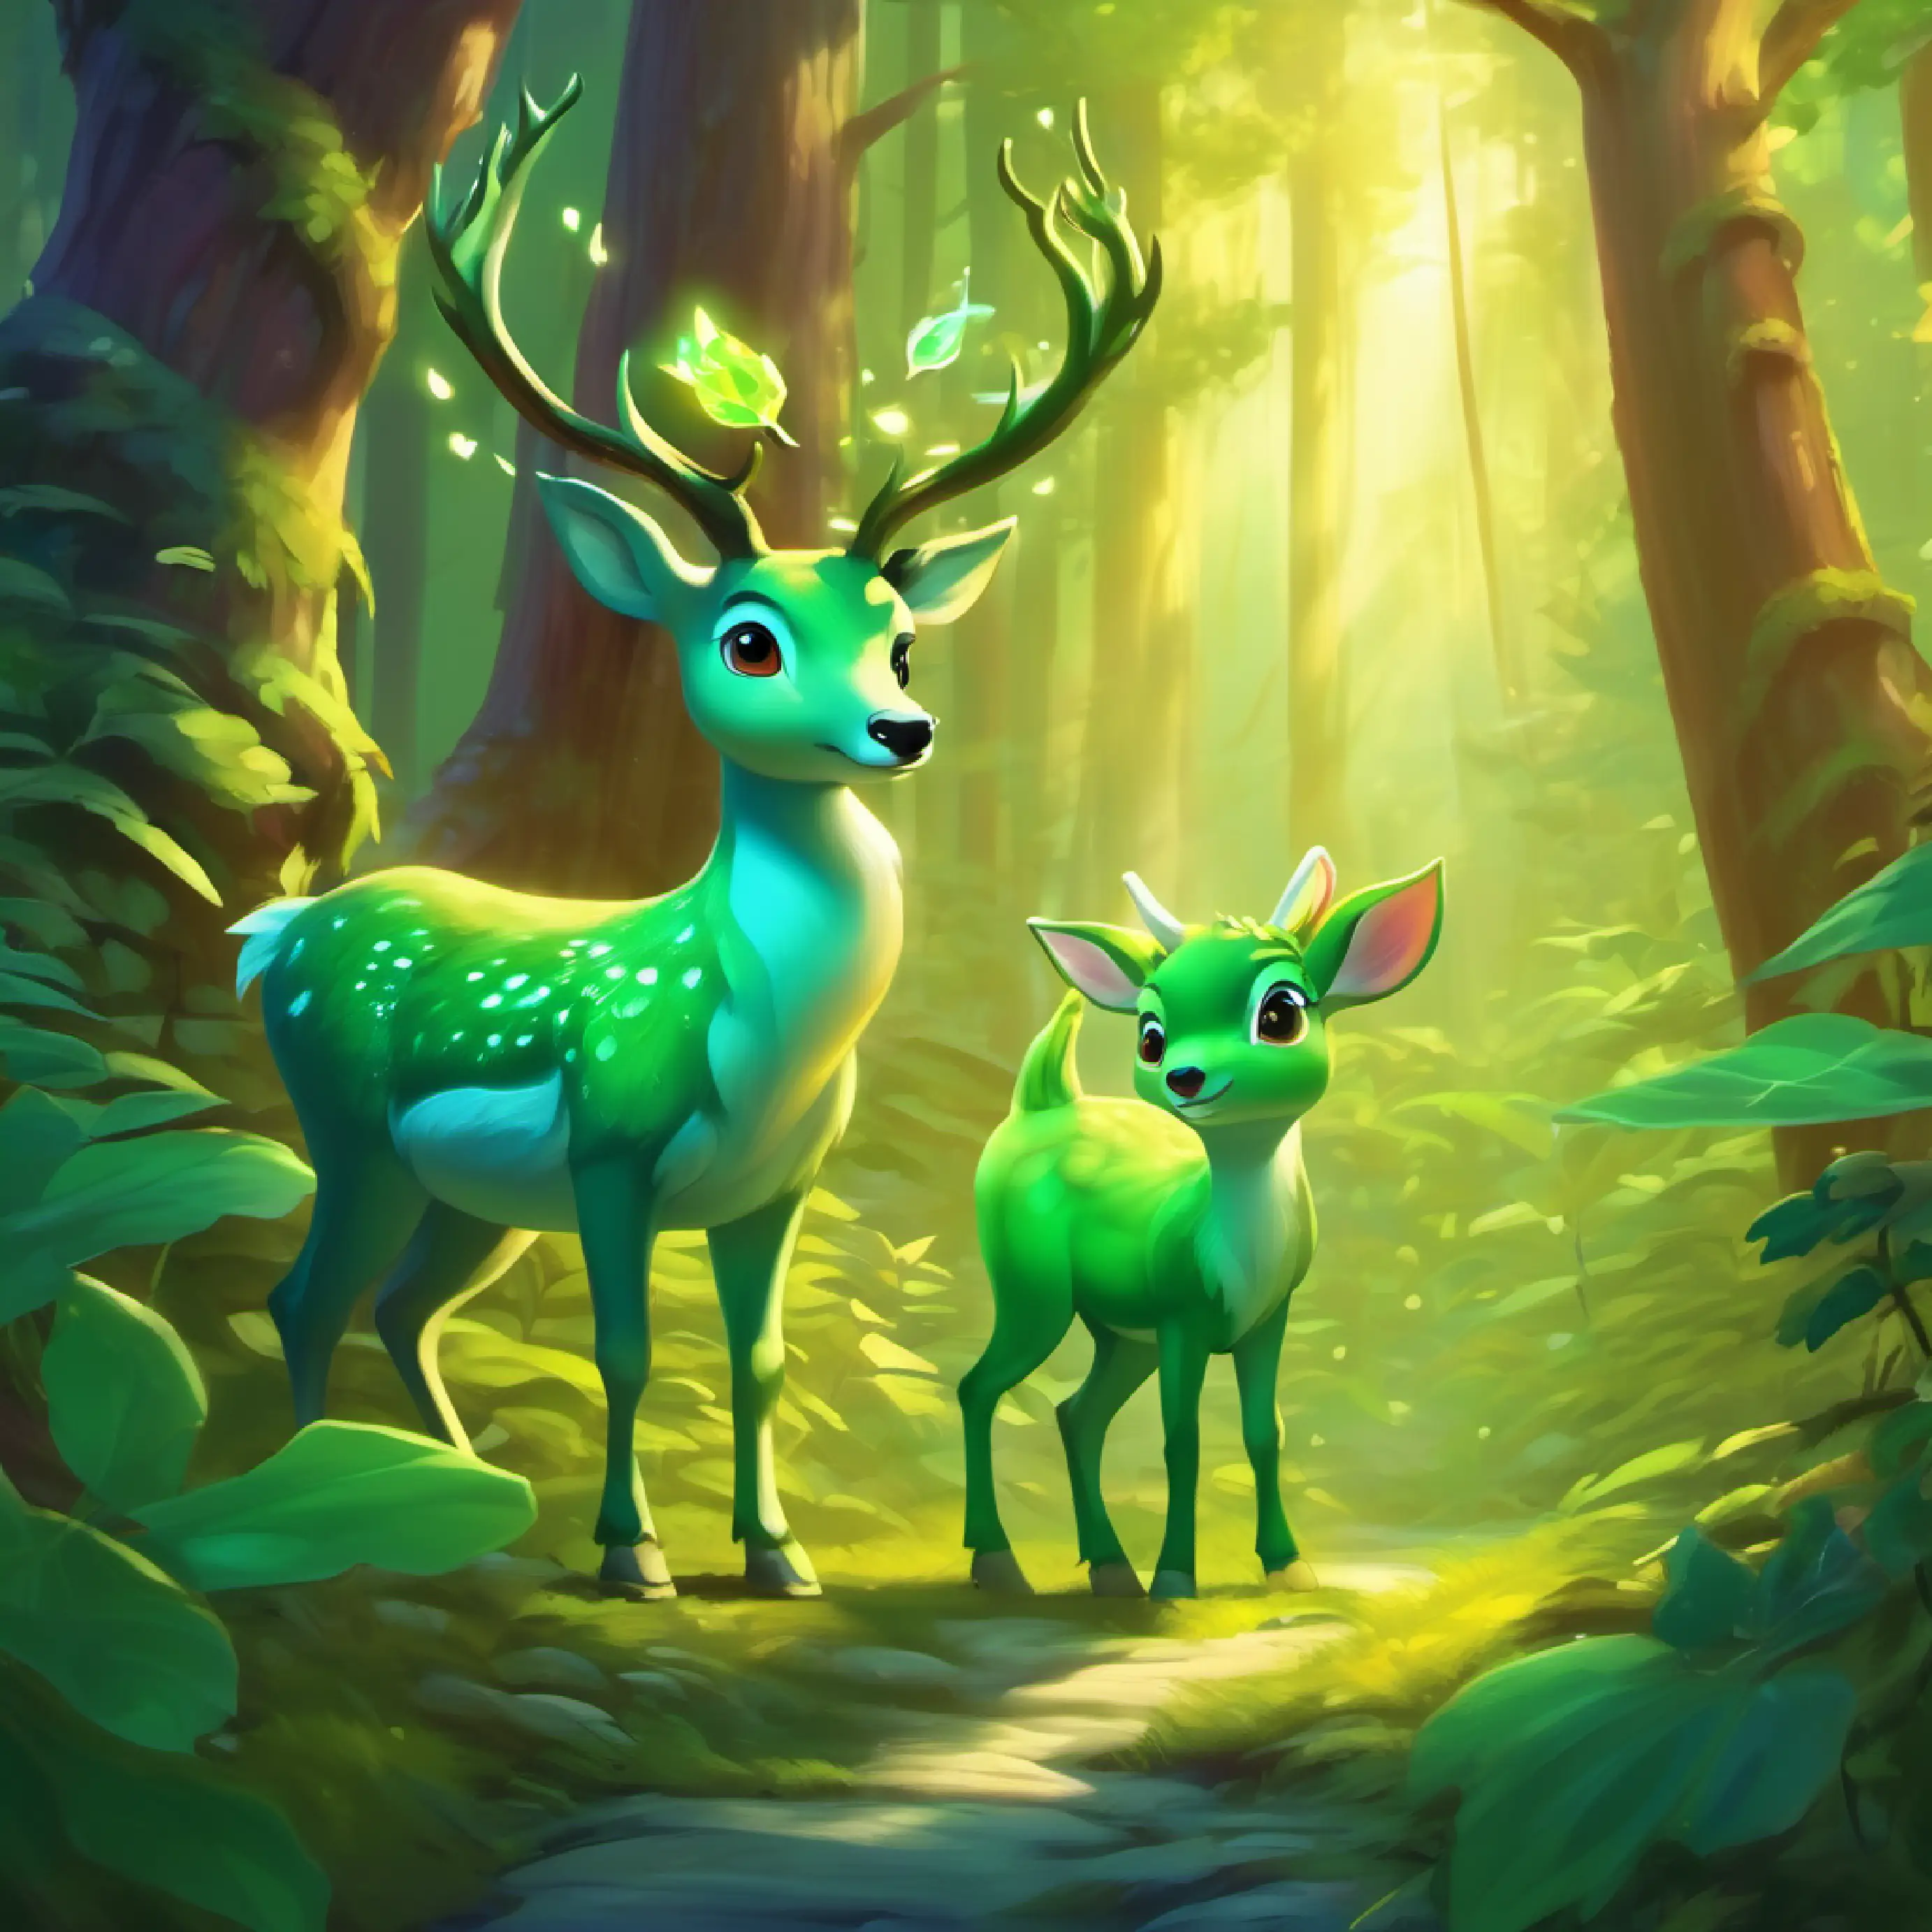 The magical deer asks A little green dragon with curious eyes and a friendly smile to find the forest's magic wand.